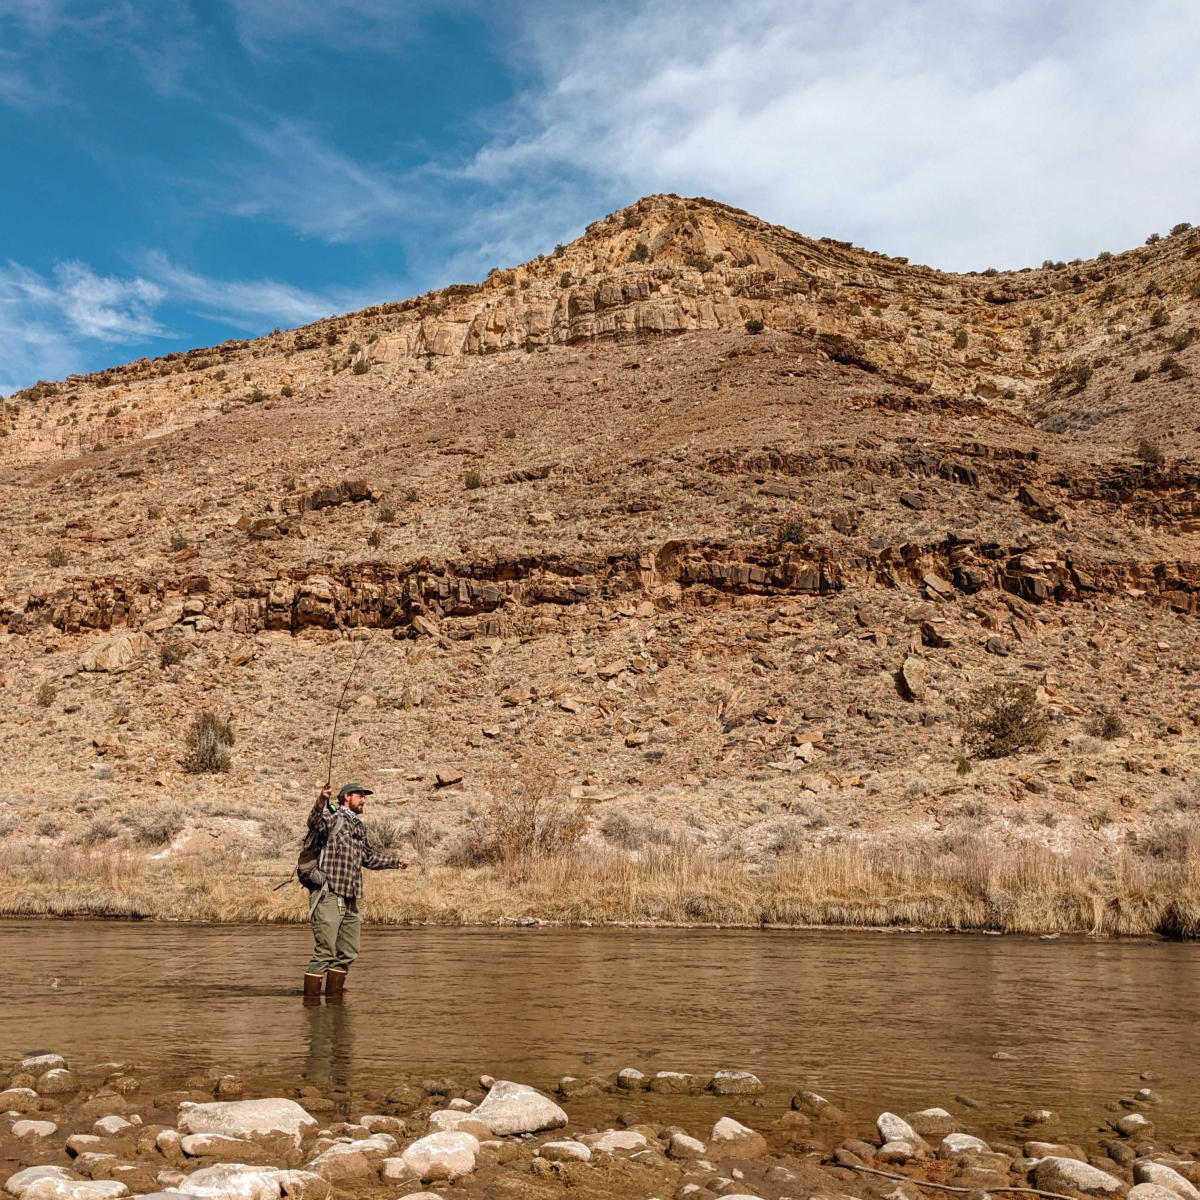 I fisherman stands in the river along the West River Trail, holding his bent fly rod high above his head with the golden walls of the Gunnison Gorge behind him.